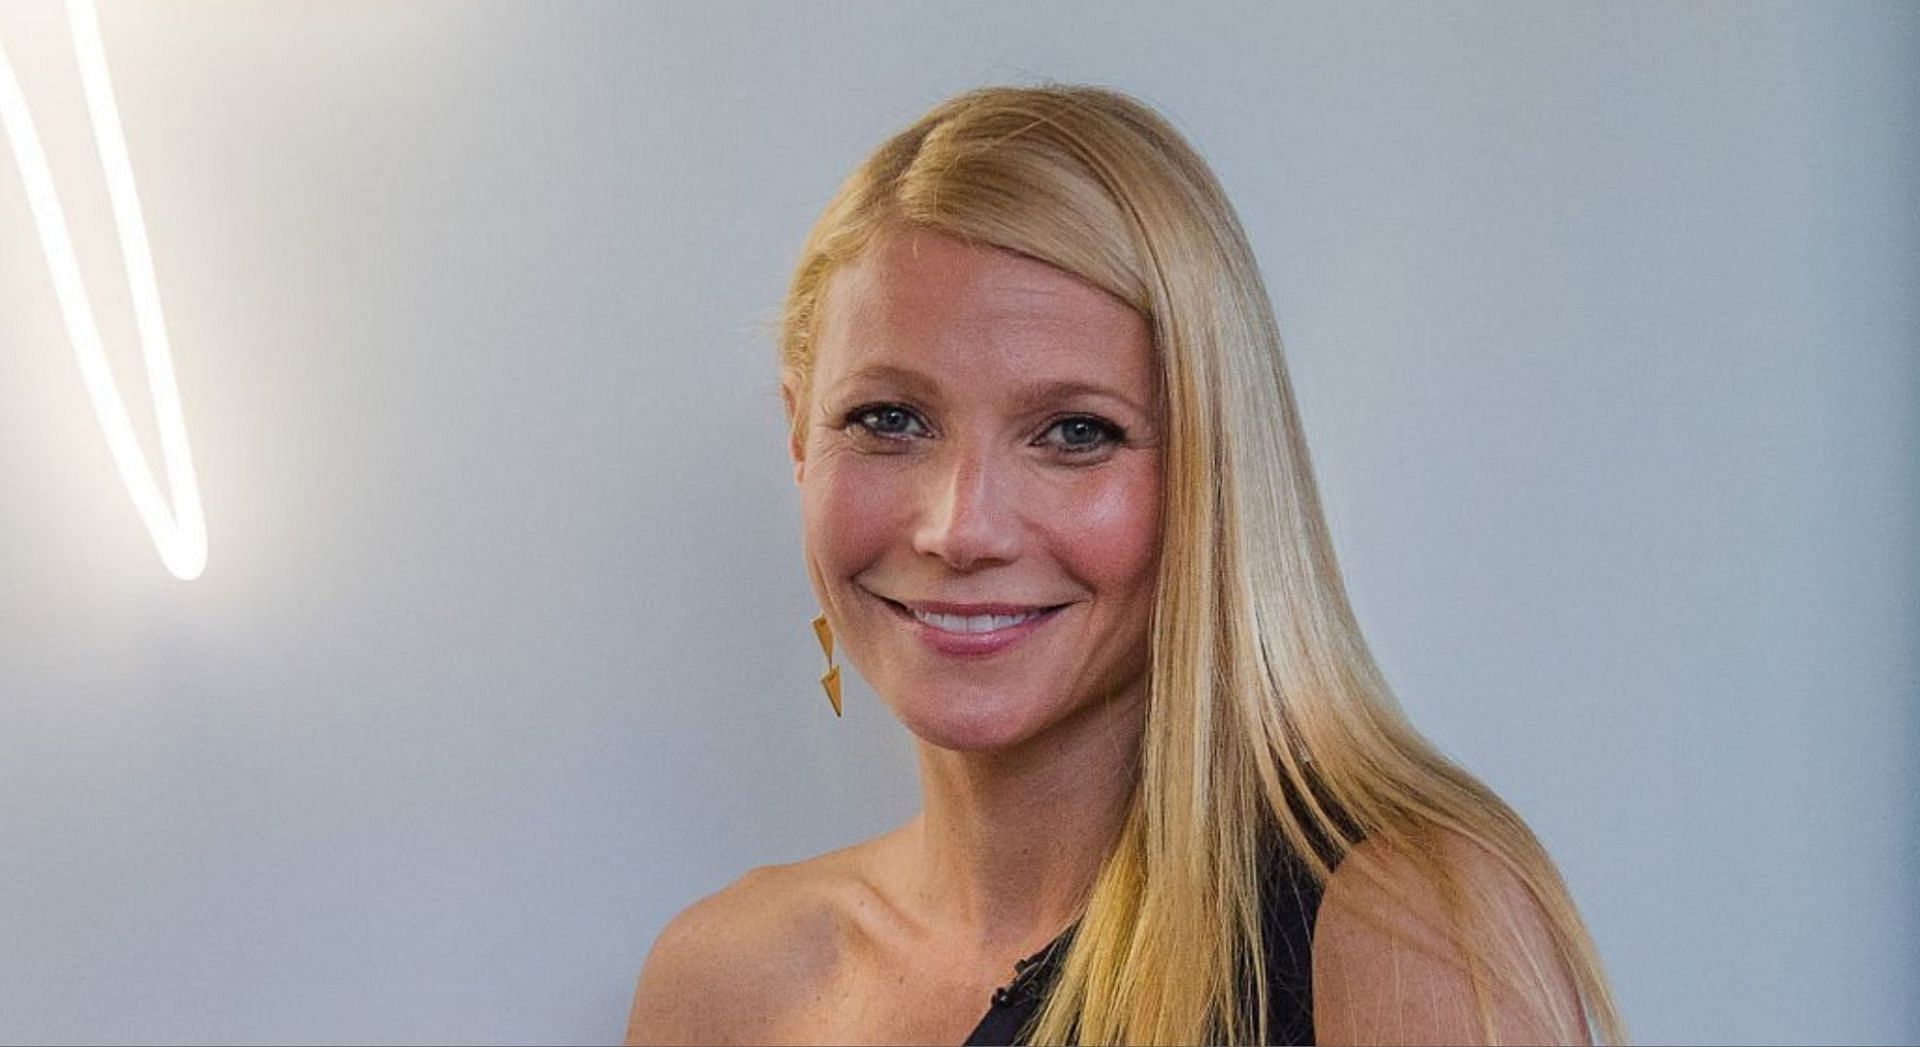 Gwyneth Paltrow was recently called out over her controversial diet and wellness routine (Image via Getty Images) 